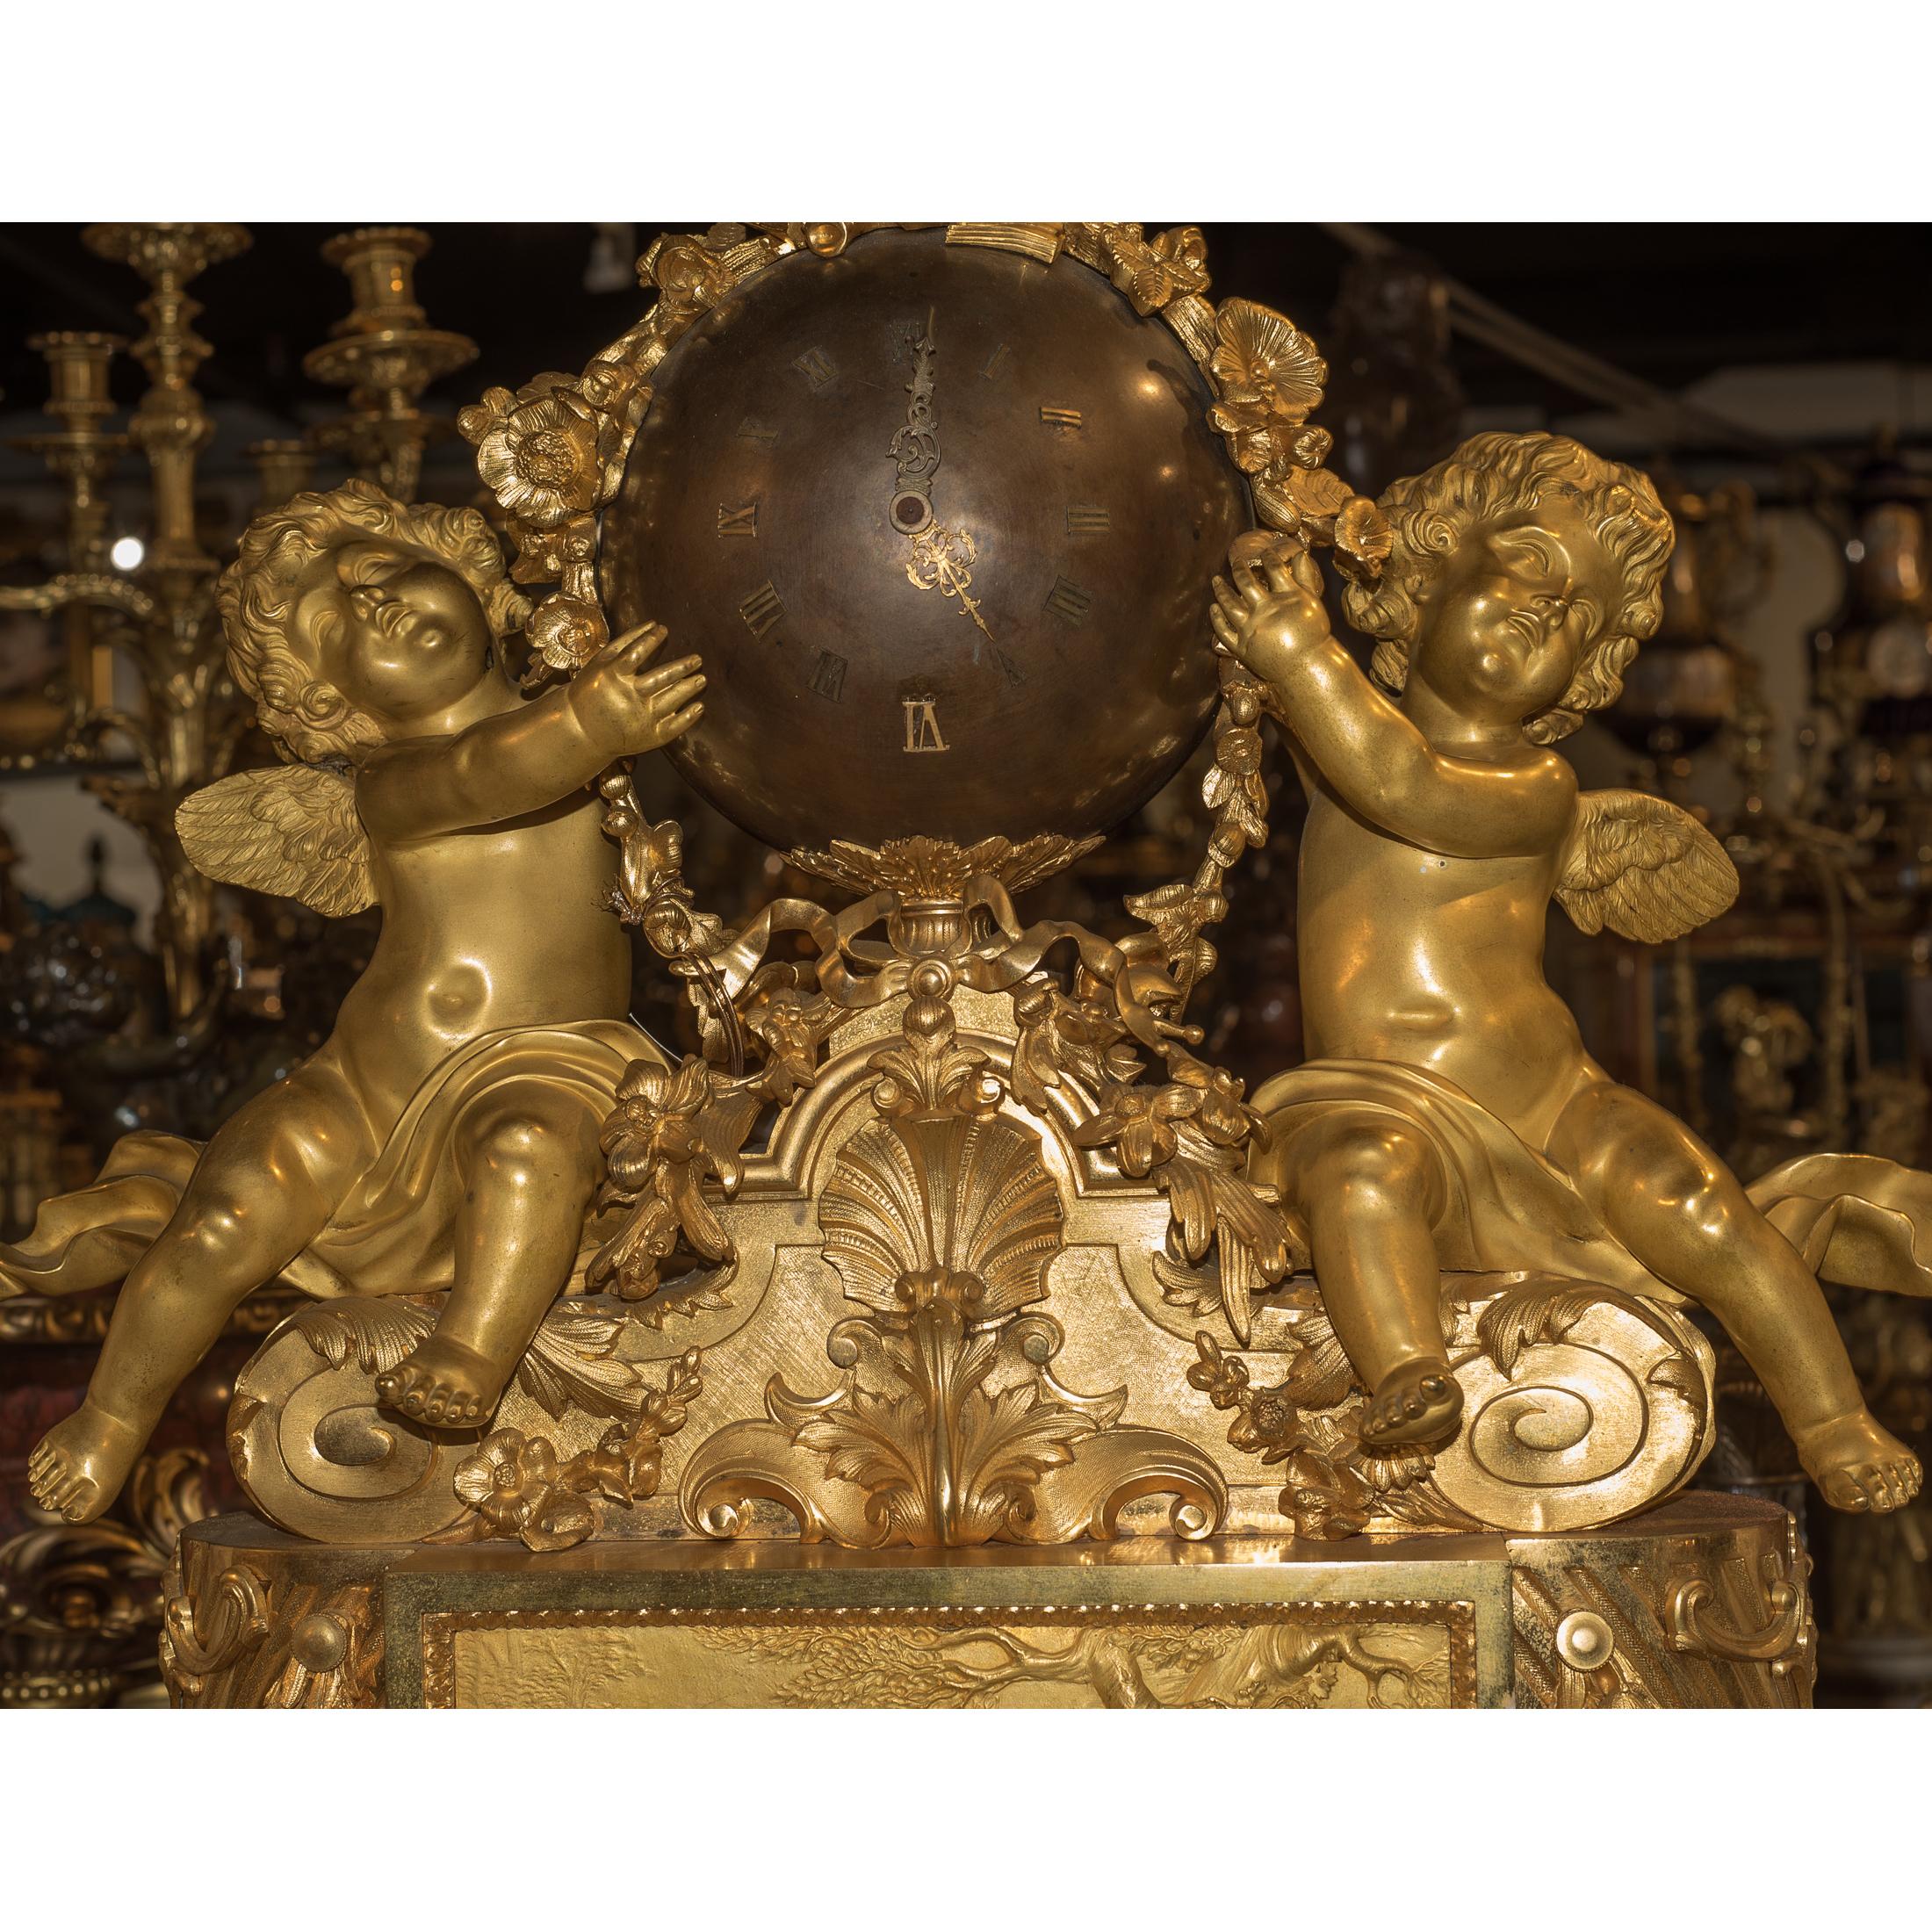 With two putti flanking the bronze spherical clockface, topped by a garlanded trophy, the movement stamped BR DENIERE A PARIS/2197

Maker: Jean-François Denière (1774-1866)
Origin: Paris, France
Size: 29 x 24 1/2 x 10 1/2 inches.